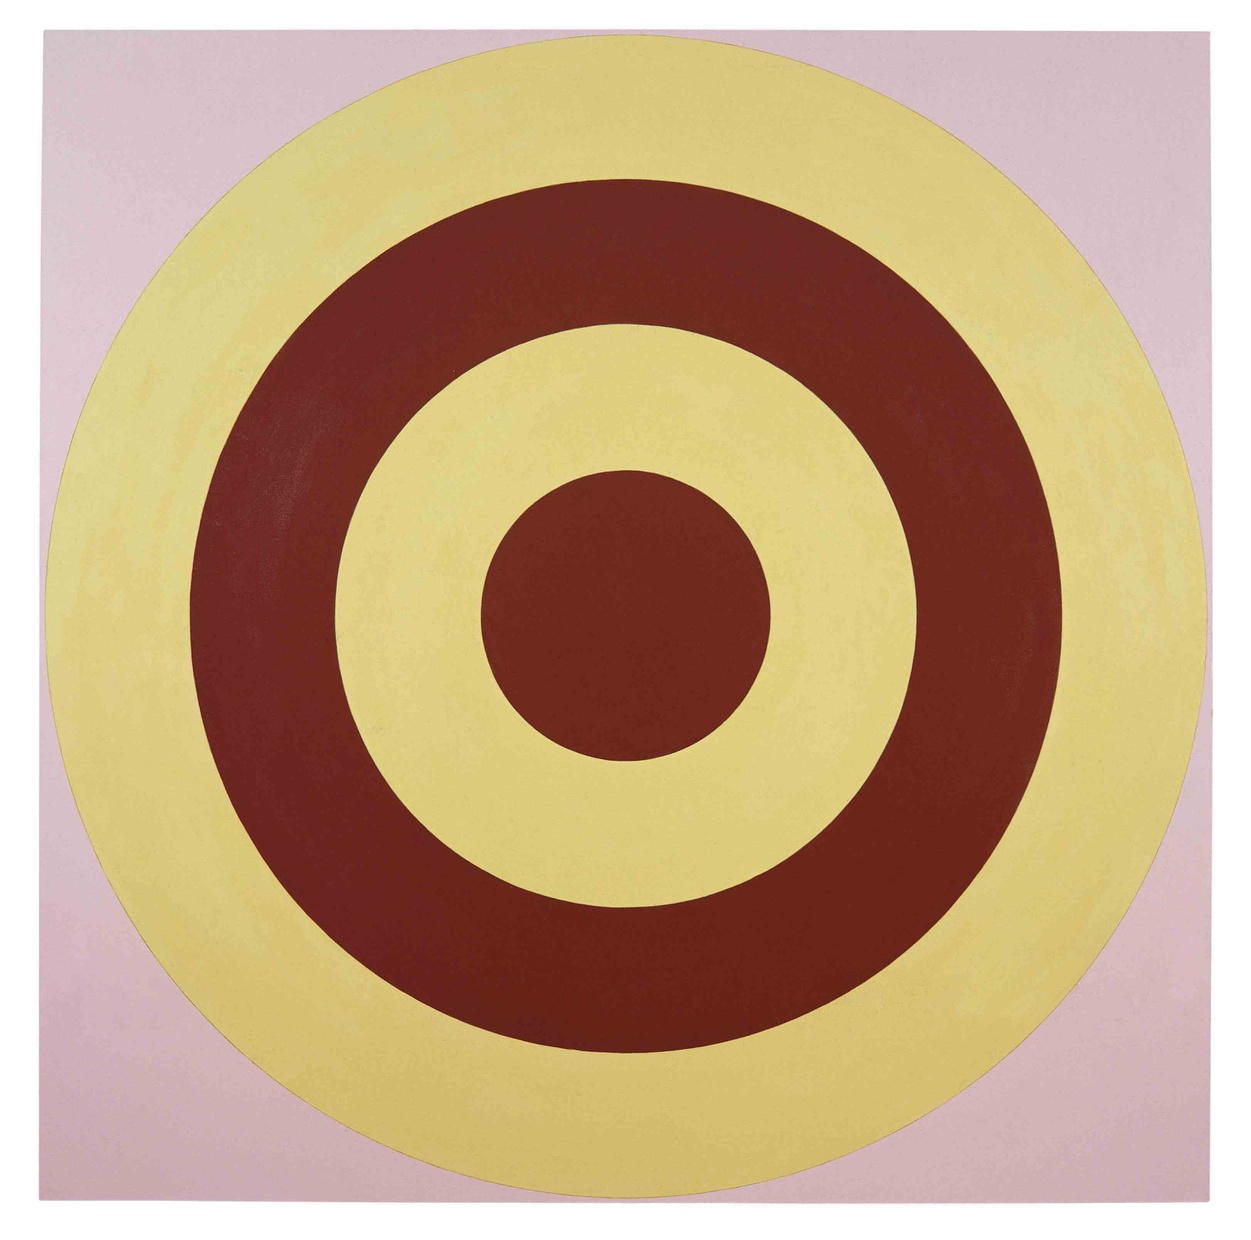 A red target painted on a yellow circle with a pink background.